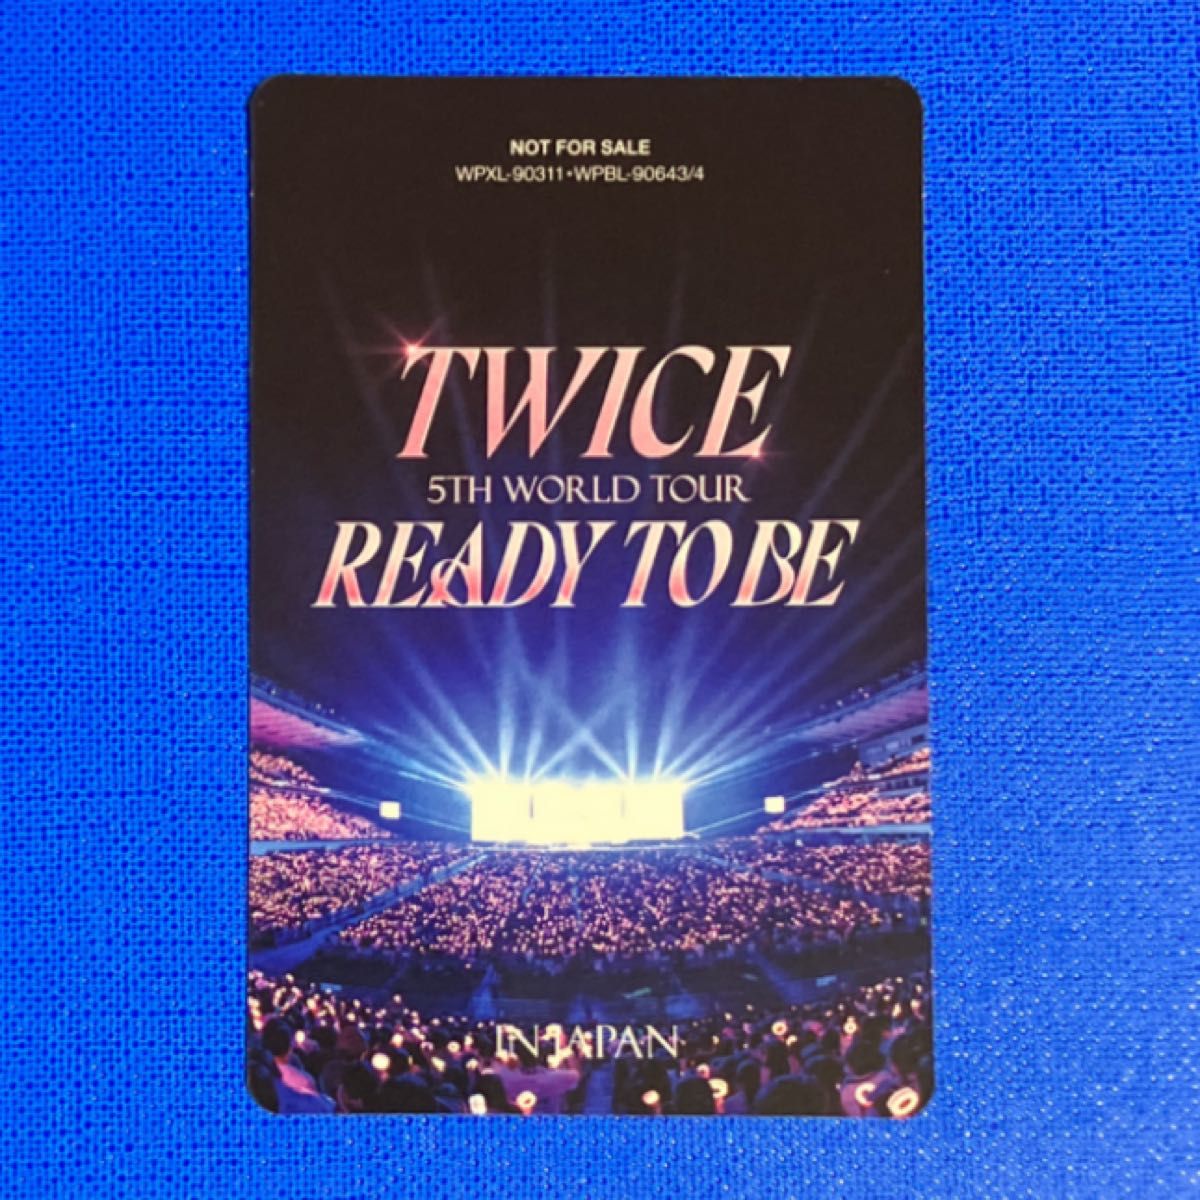 TWICE 5TH WORLD TOUR 'READY TO BE DVD BluRay 初回限定盤 チェヨン